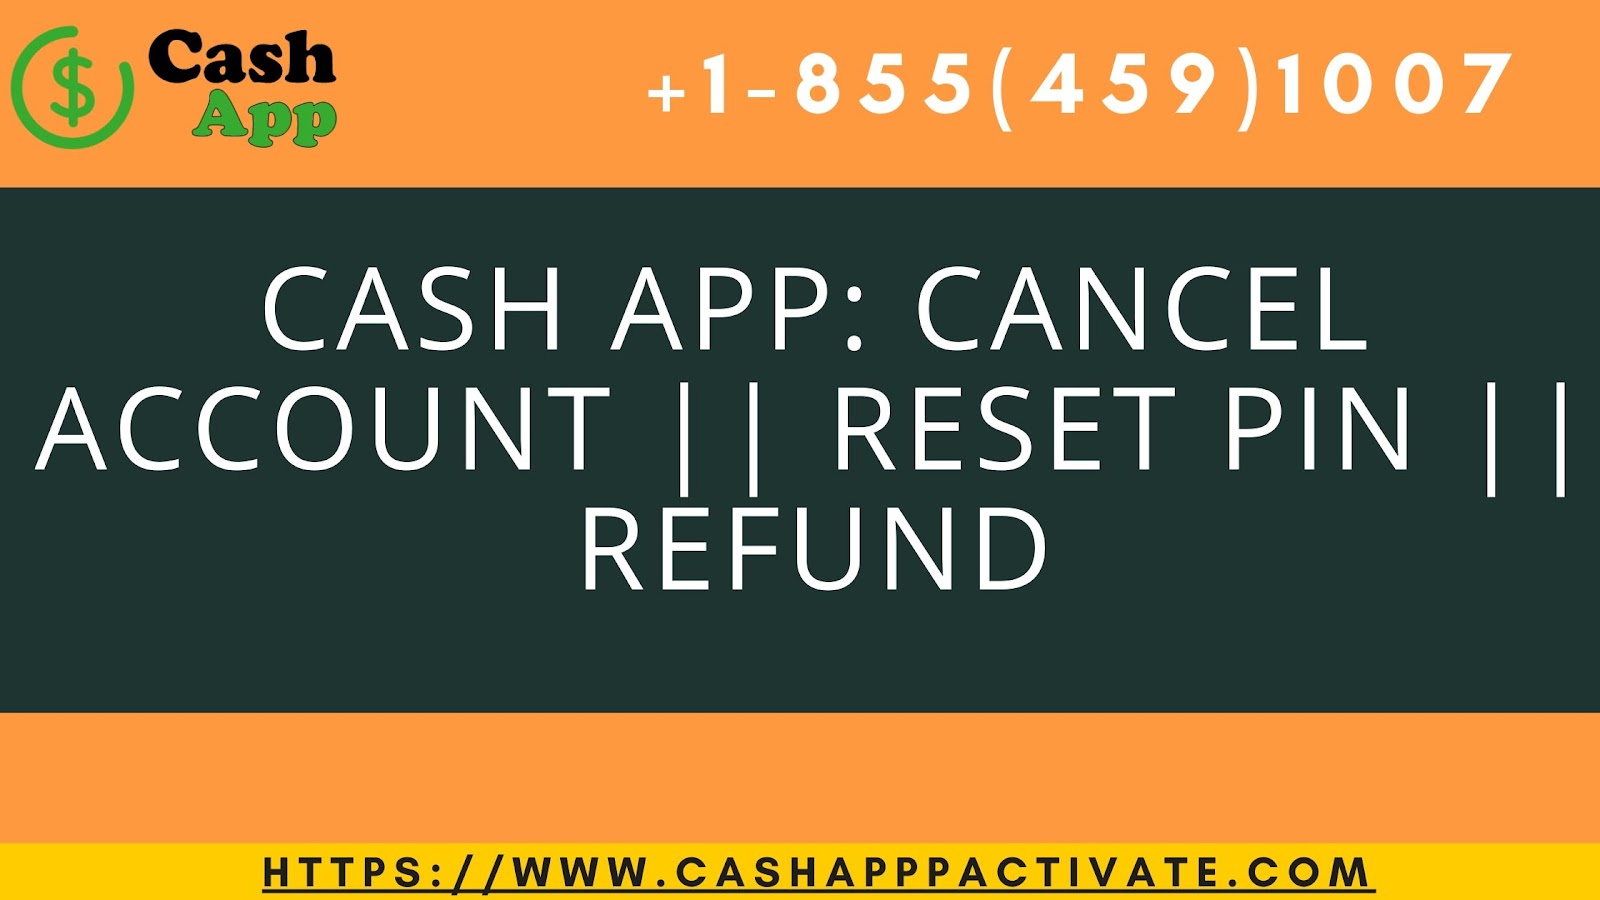 Call 1855 459 1007 Cash App Refund Activate Card Help Activate Cash App Card